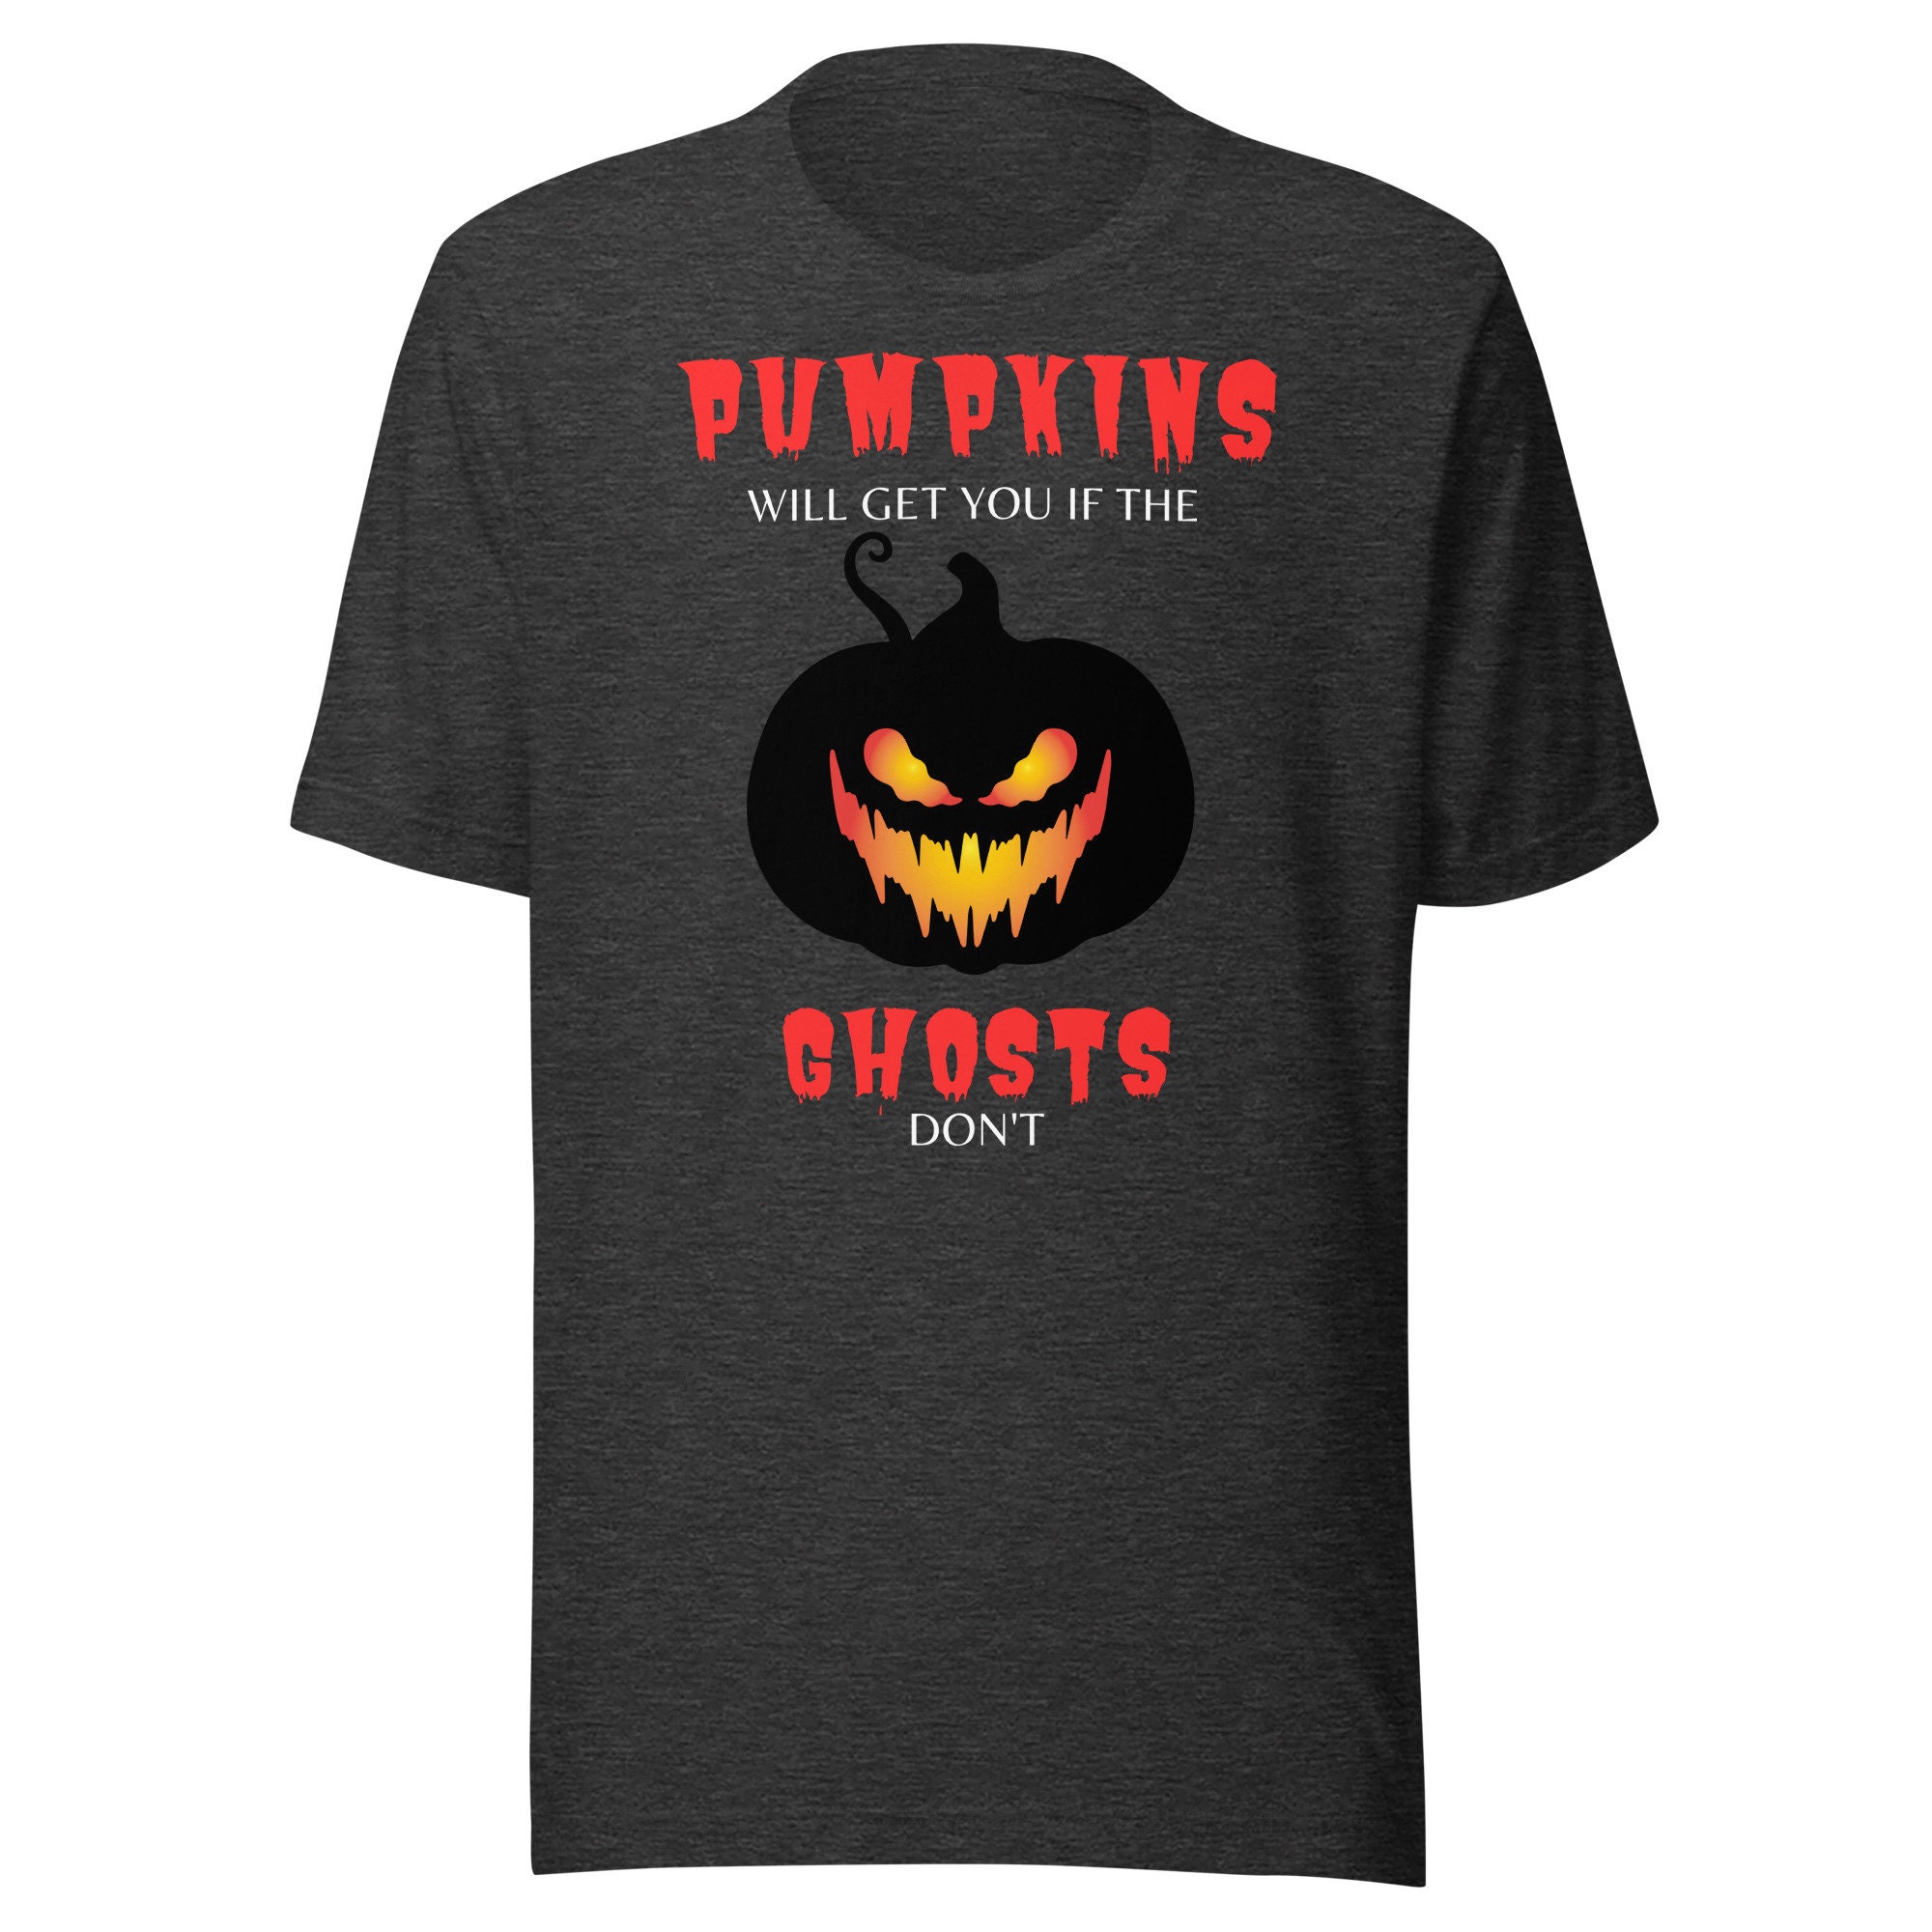 Discover pumpkins will get you if the ghosts don't T-shirt